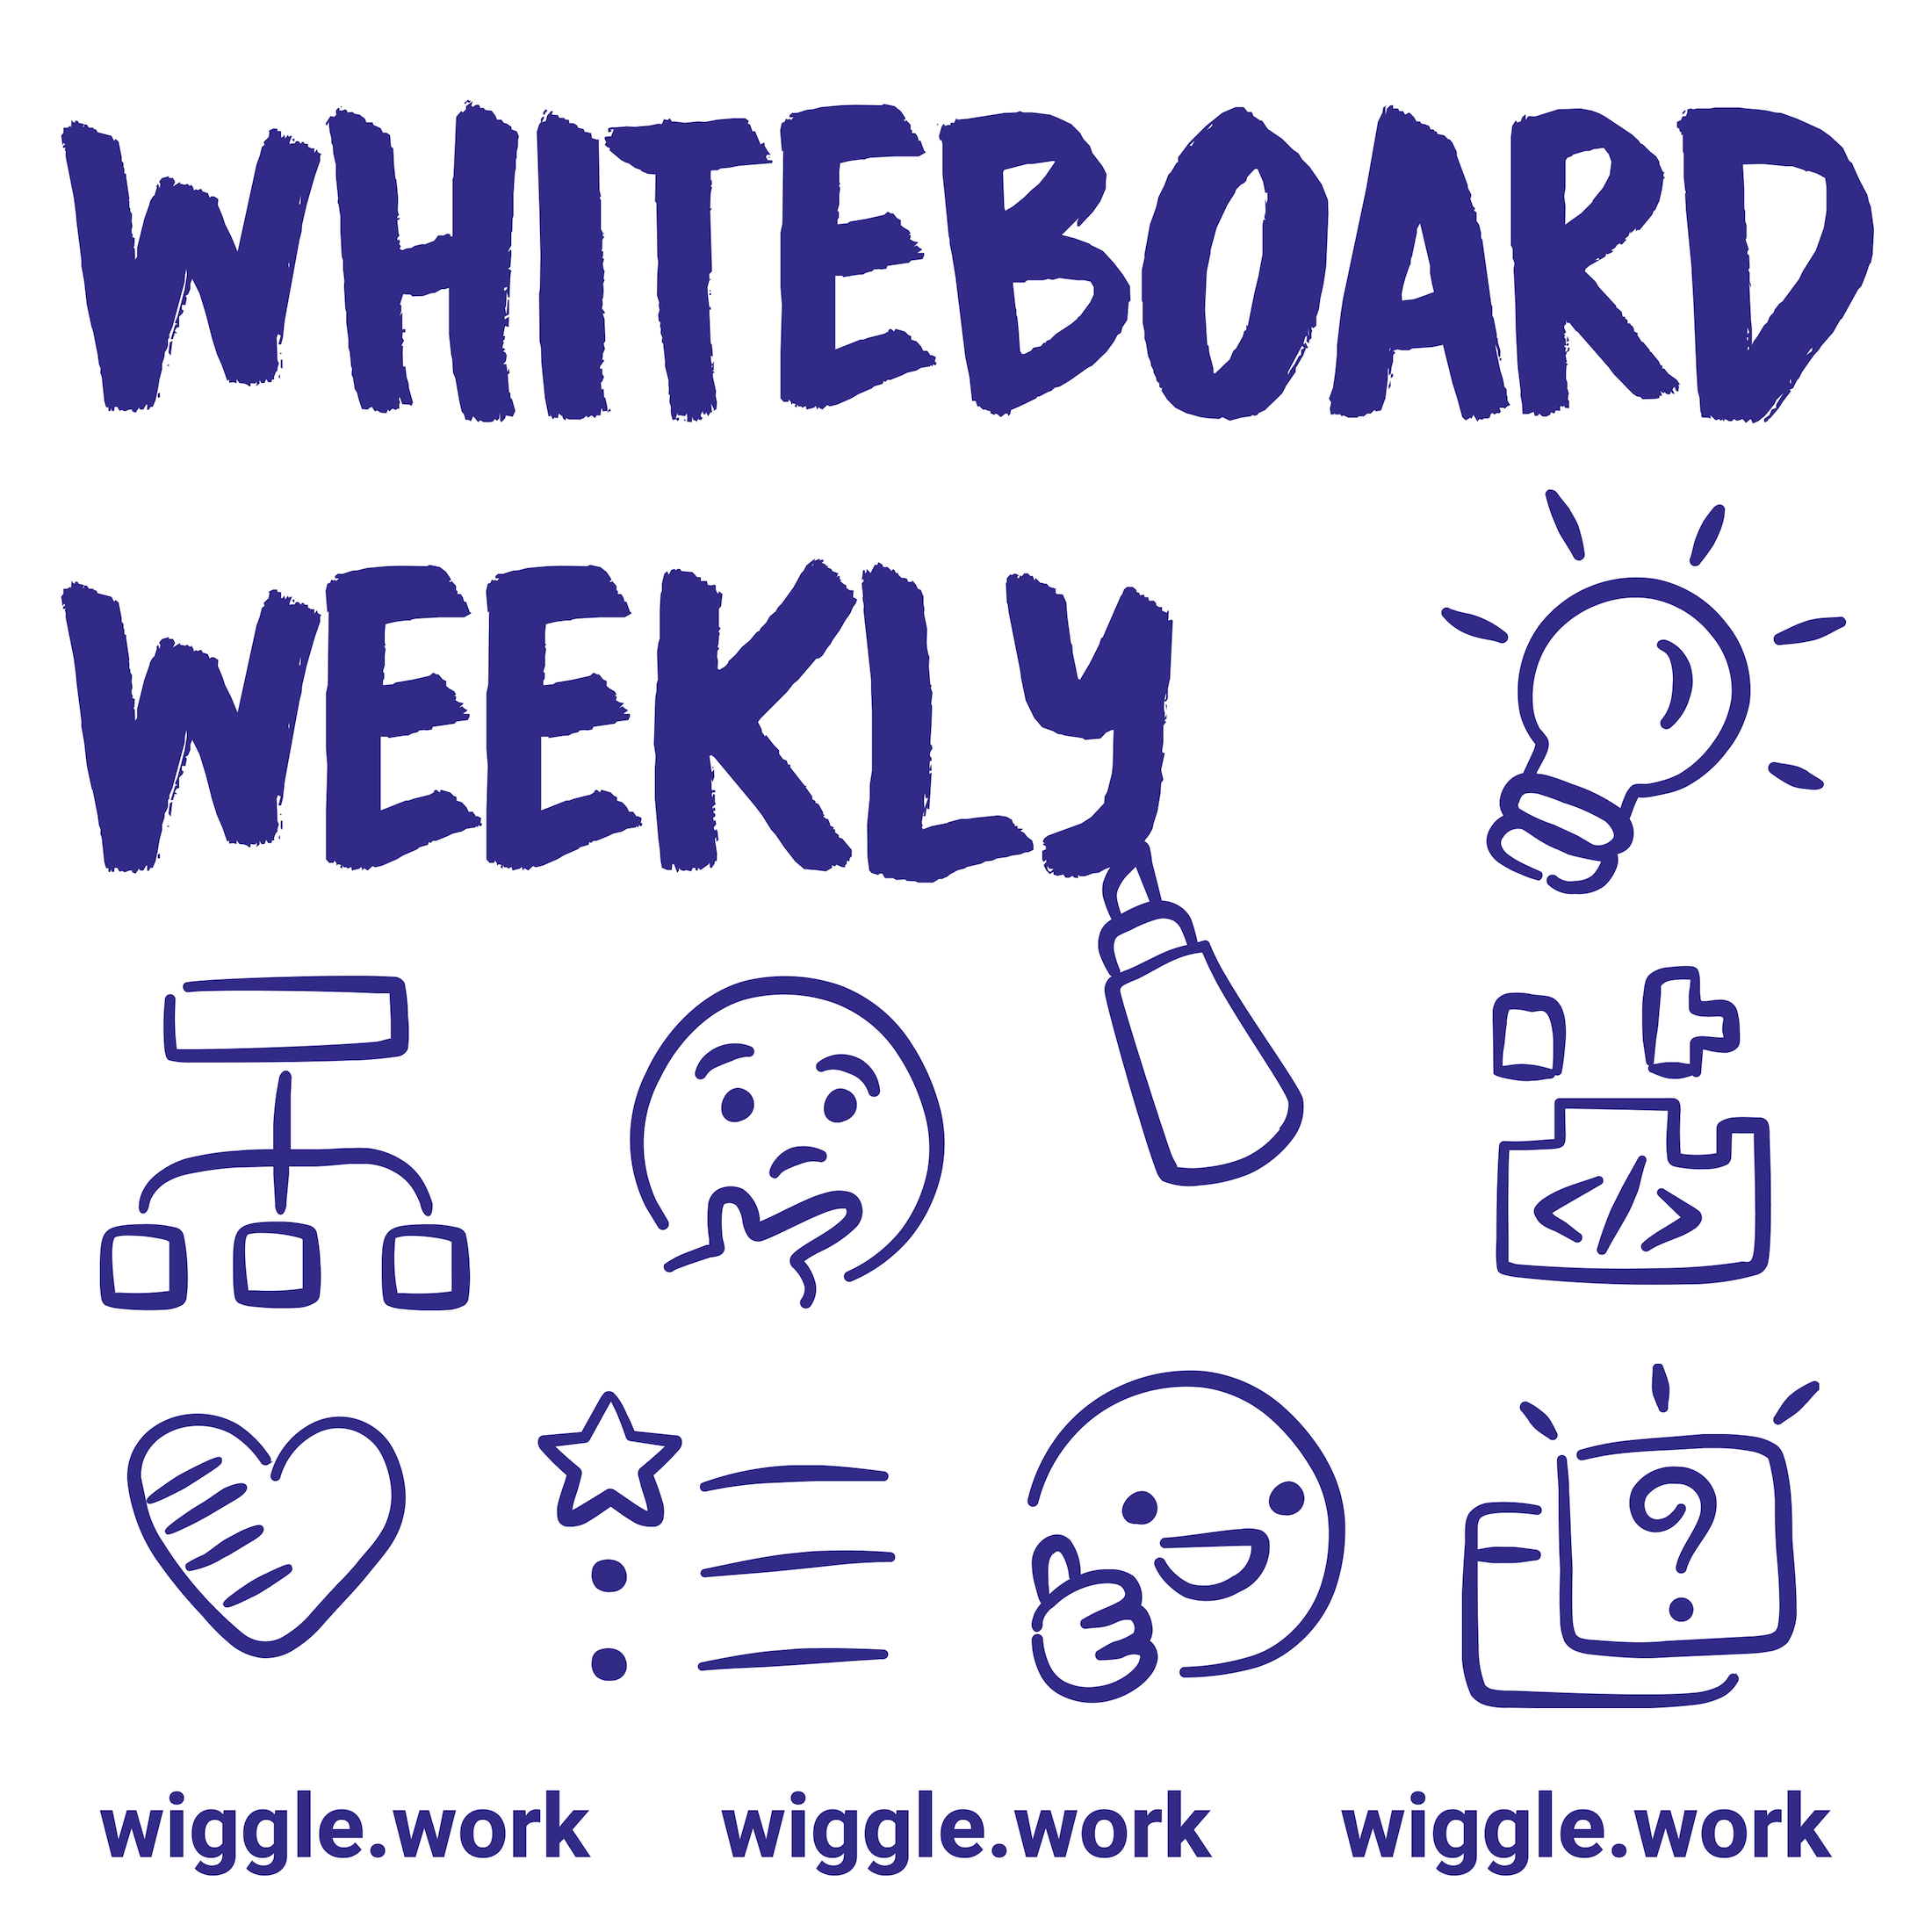 Whiteboard text graphic